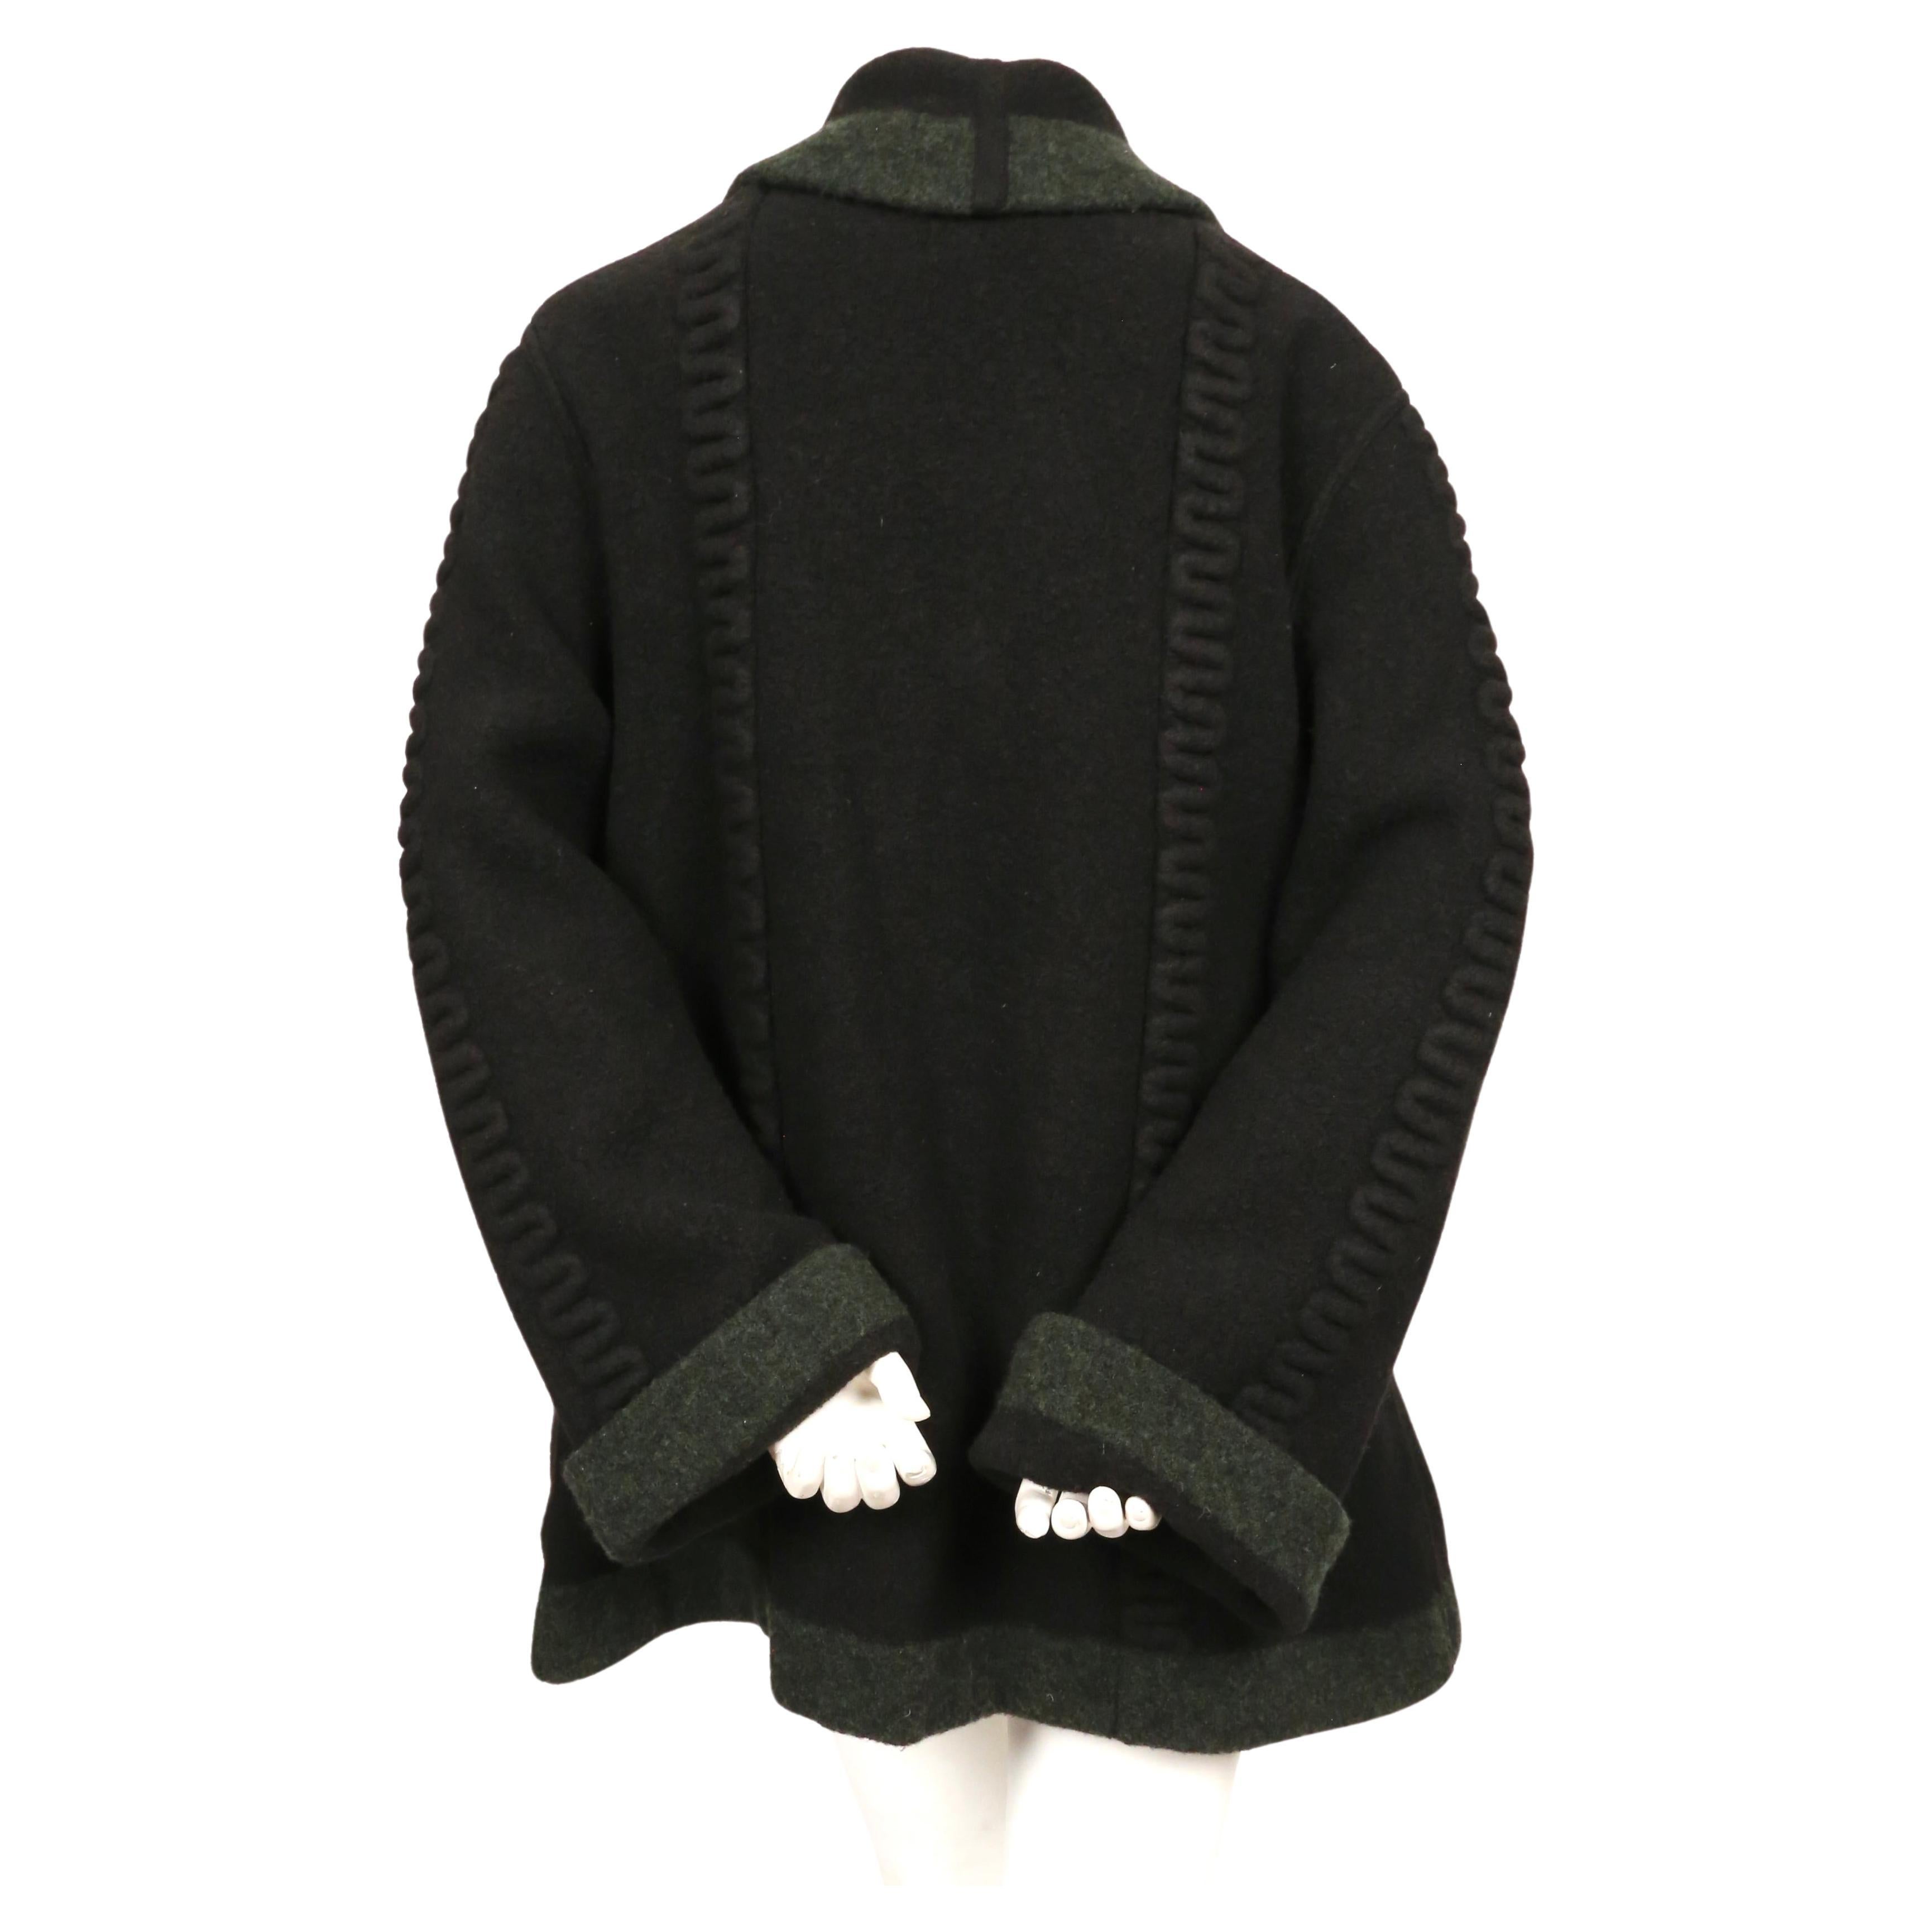 1994 AZZEDINE ALAIA deep navy blue and green oversized wool cardigan sweater For Sale 1